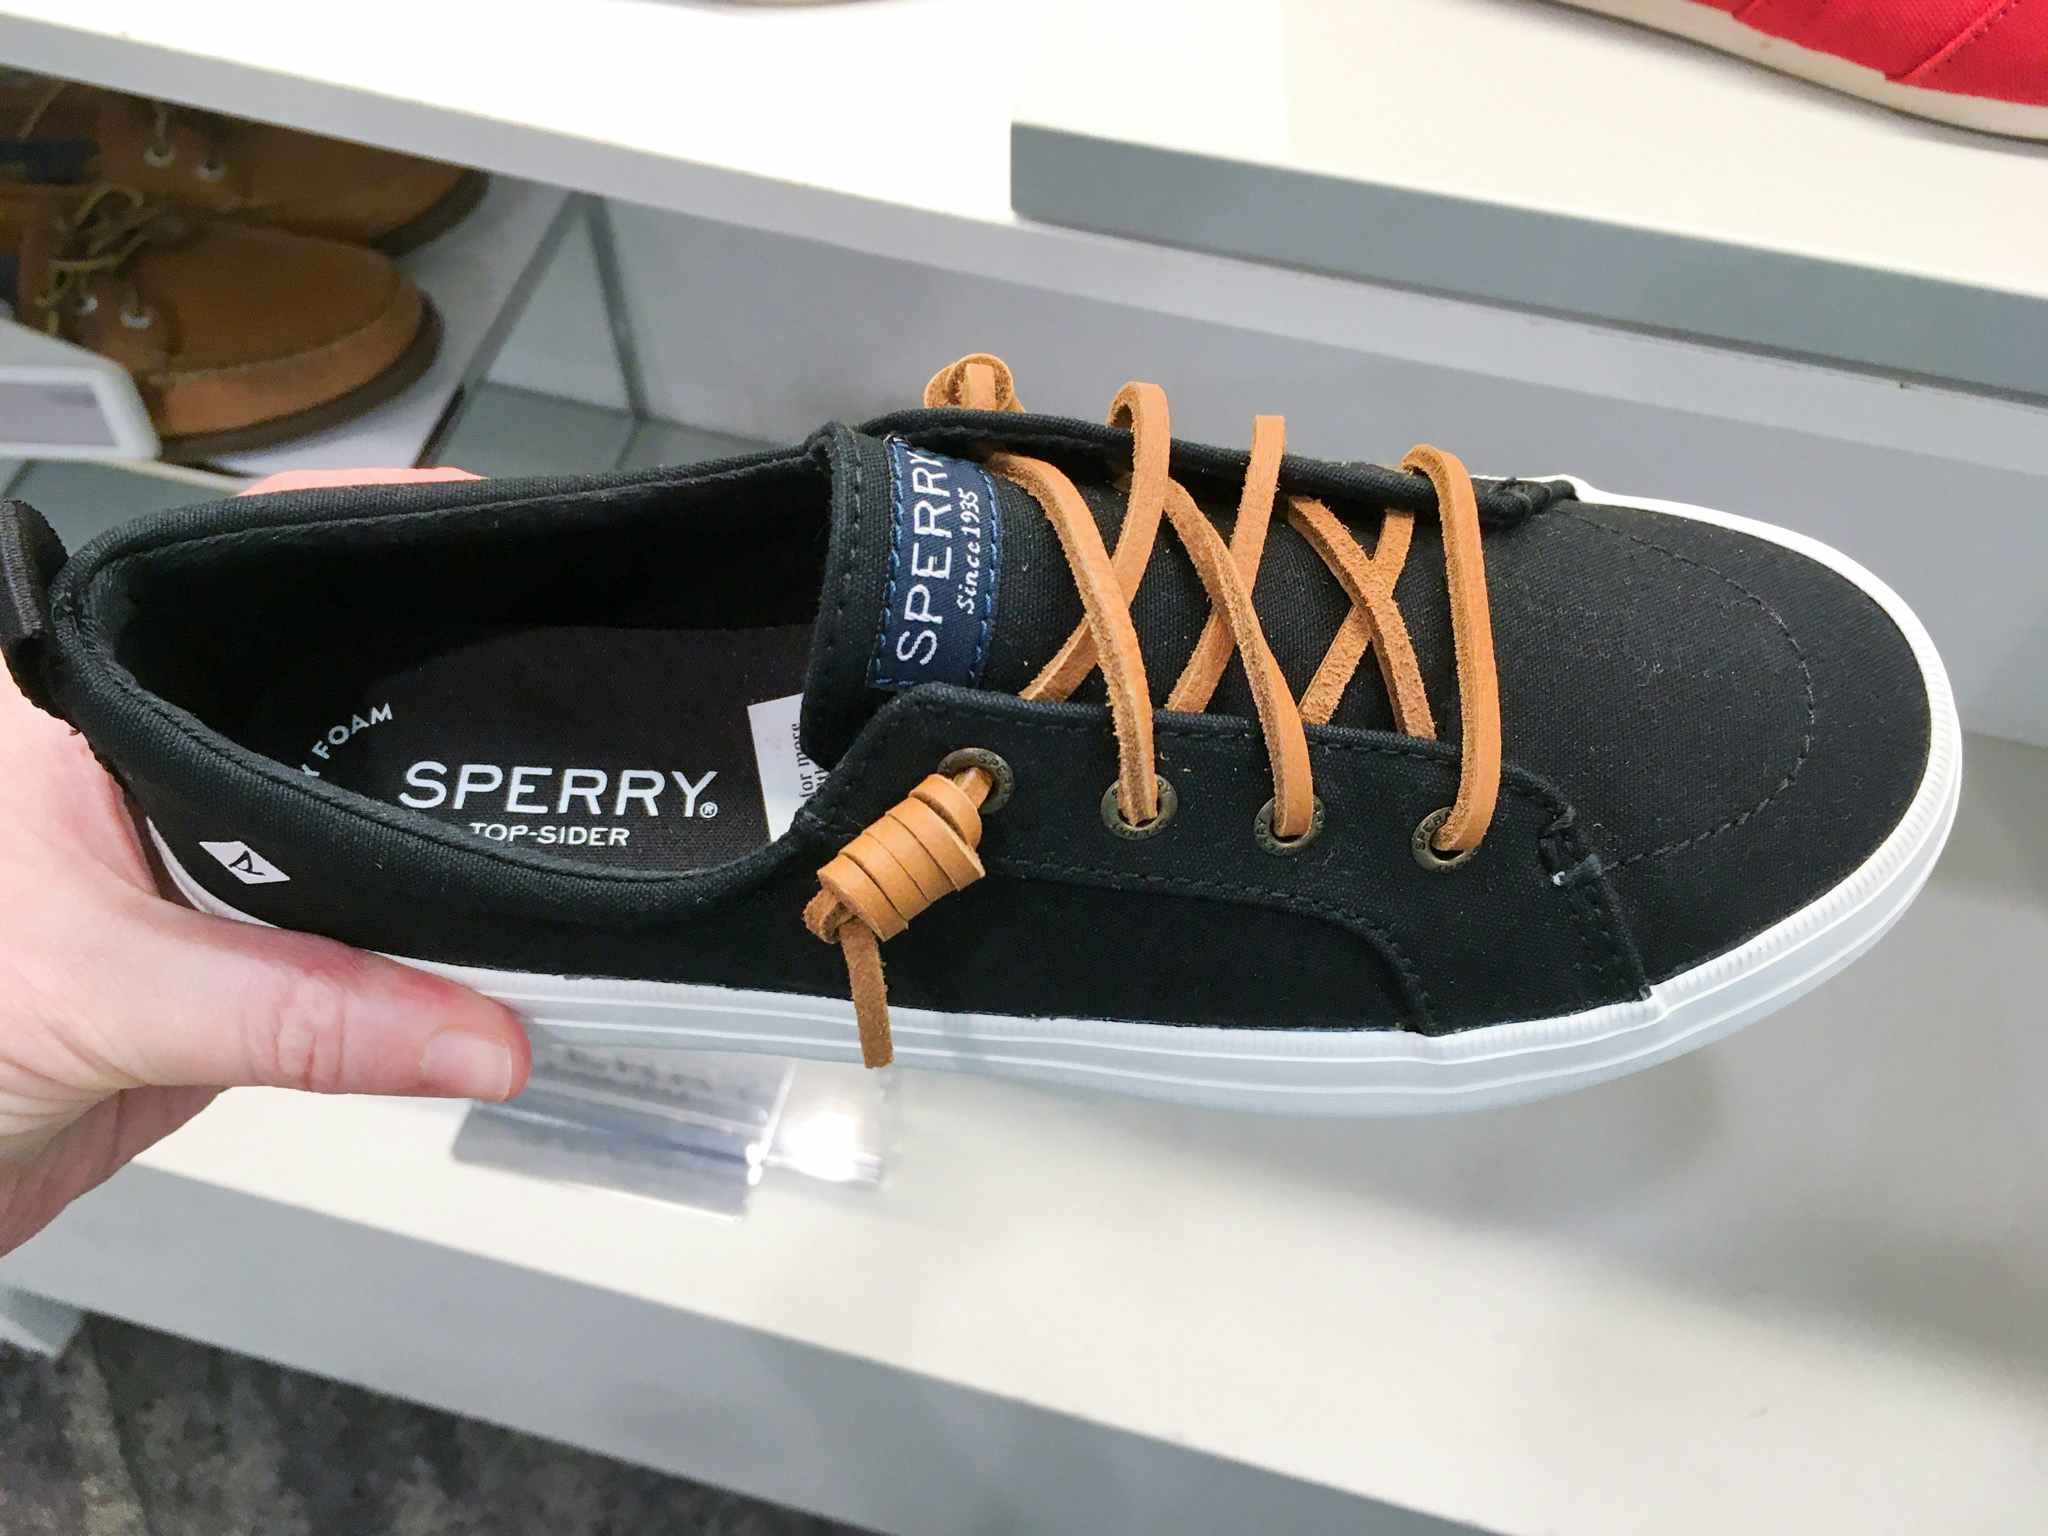 Sperry’s Sale’s on Sale Event — Sneakers Starting at $35